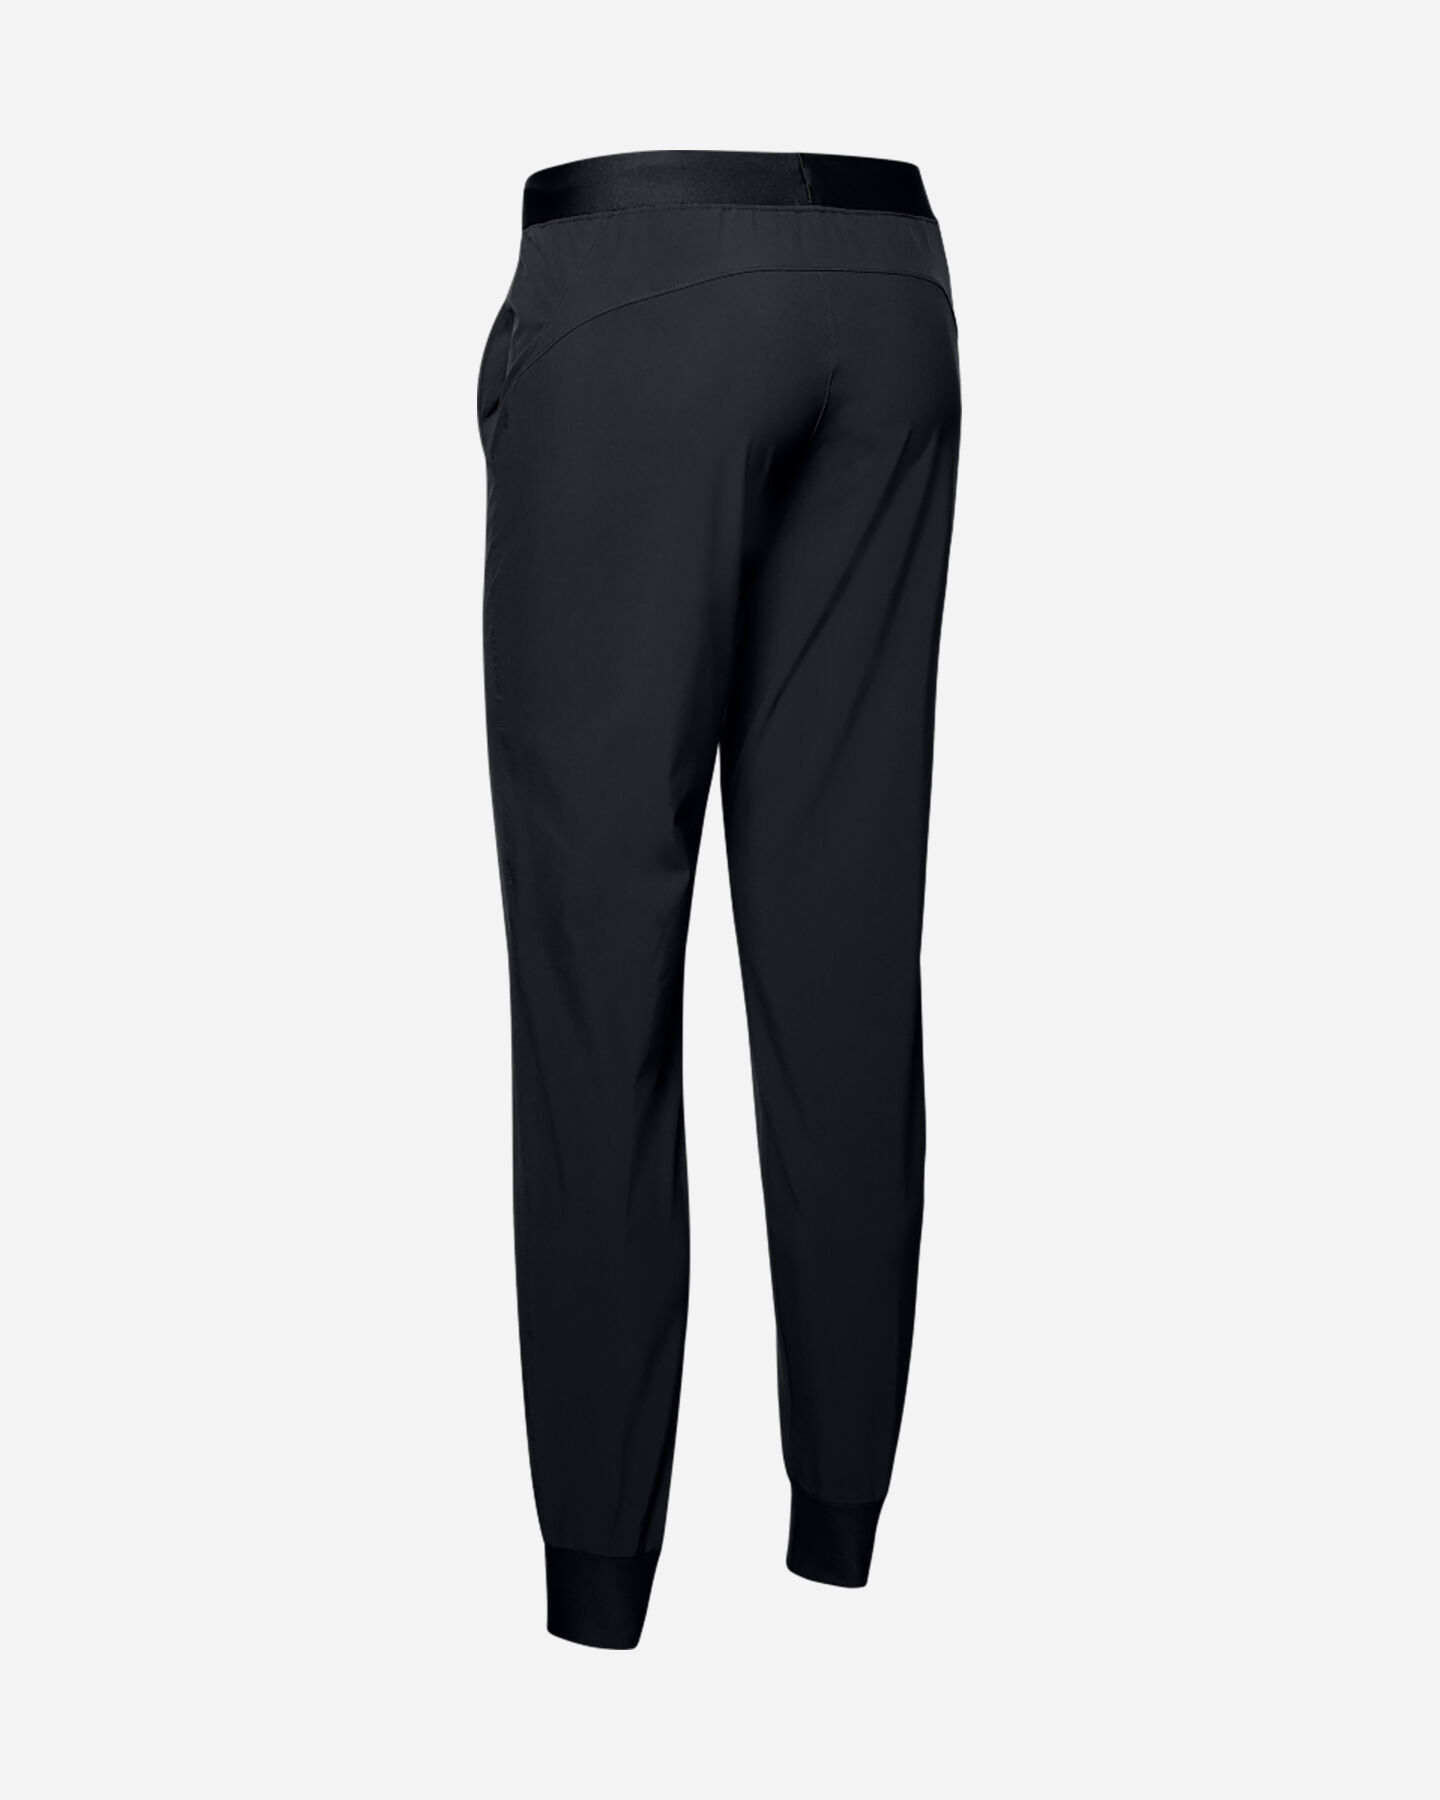  Pantalone UNDER ARMOUR WOVEN W S5168706|0001|XS scatto 3